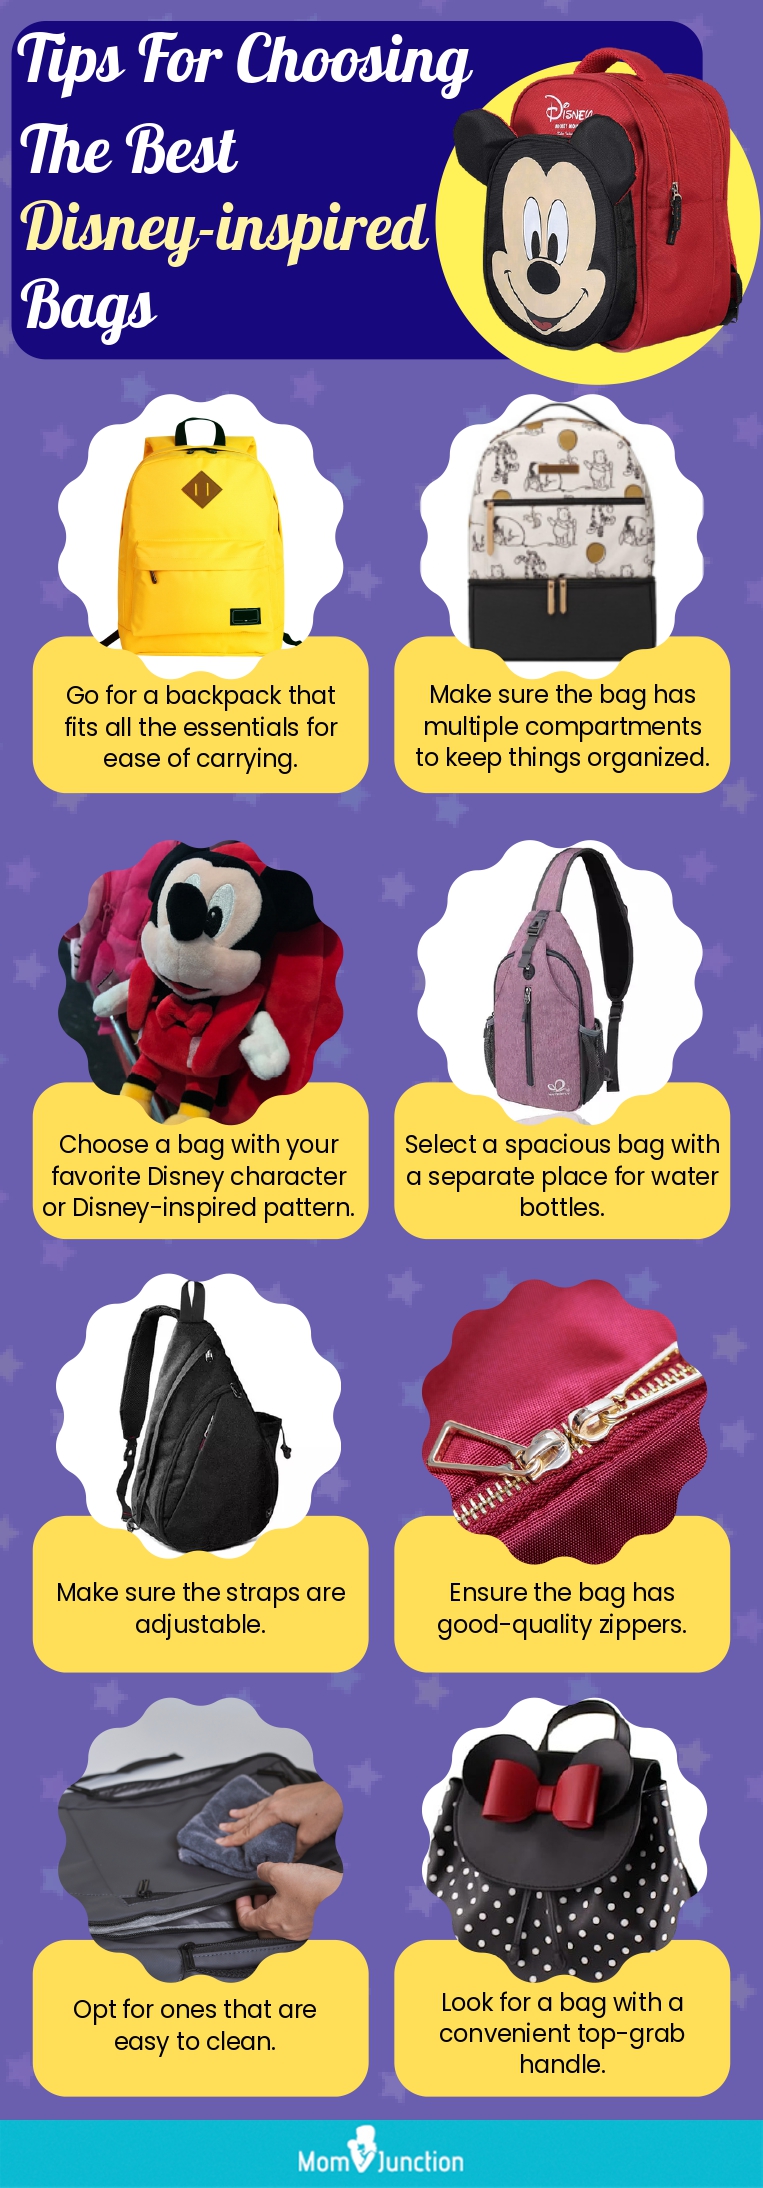 Tips For Choosing The Best Disney-inspired Bags (infographic)